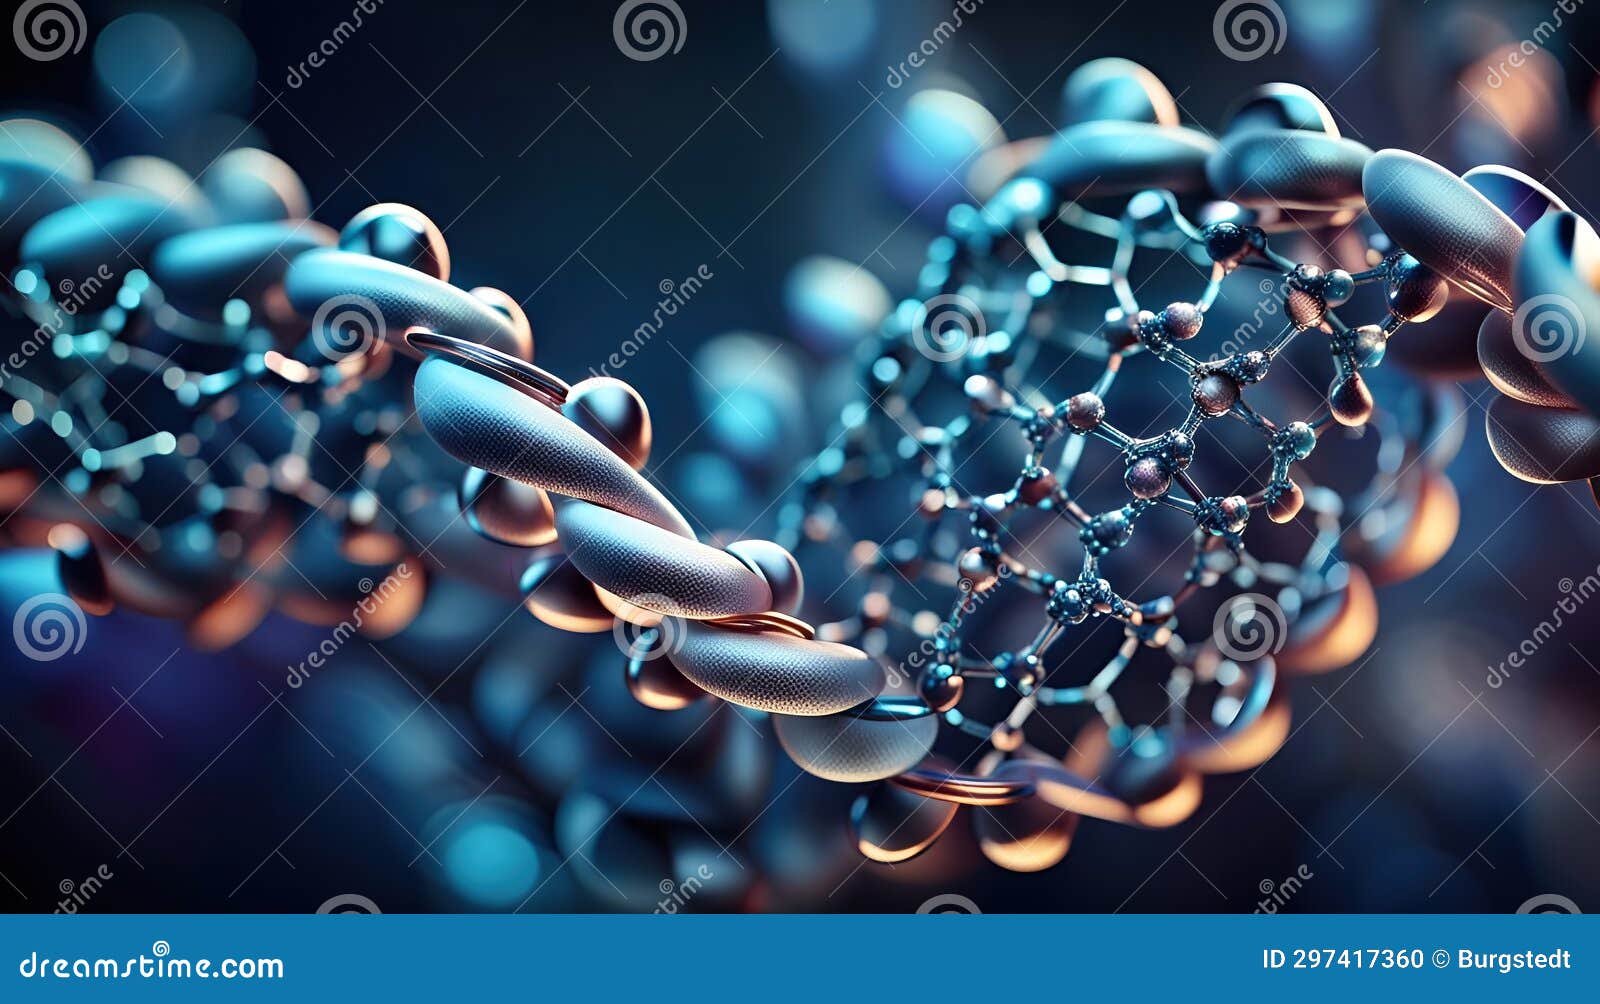 protein structure or macromolecules consisting of a chain of amino acid residues